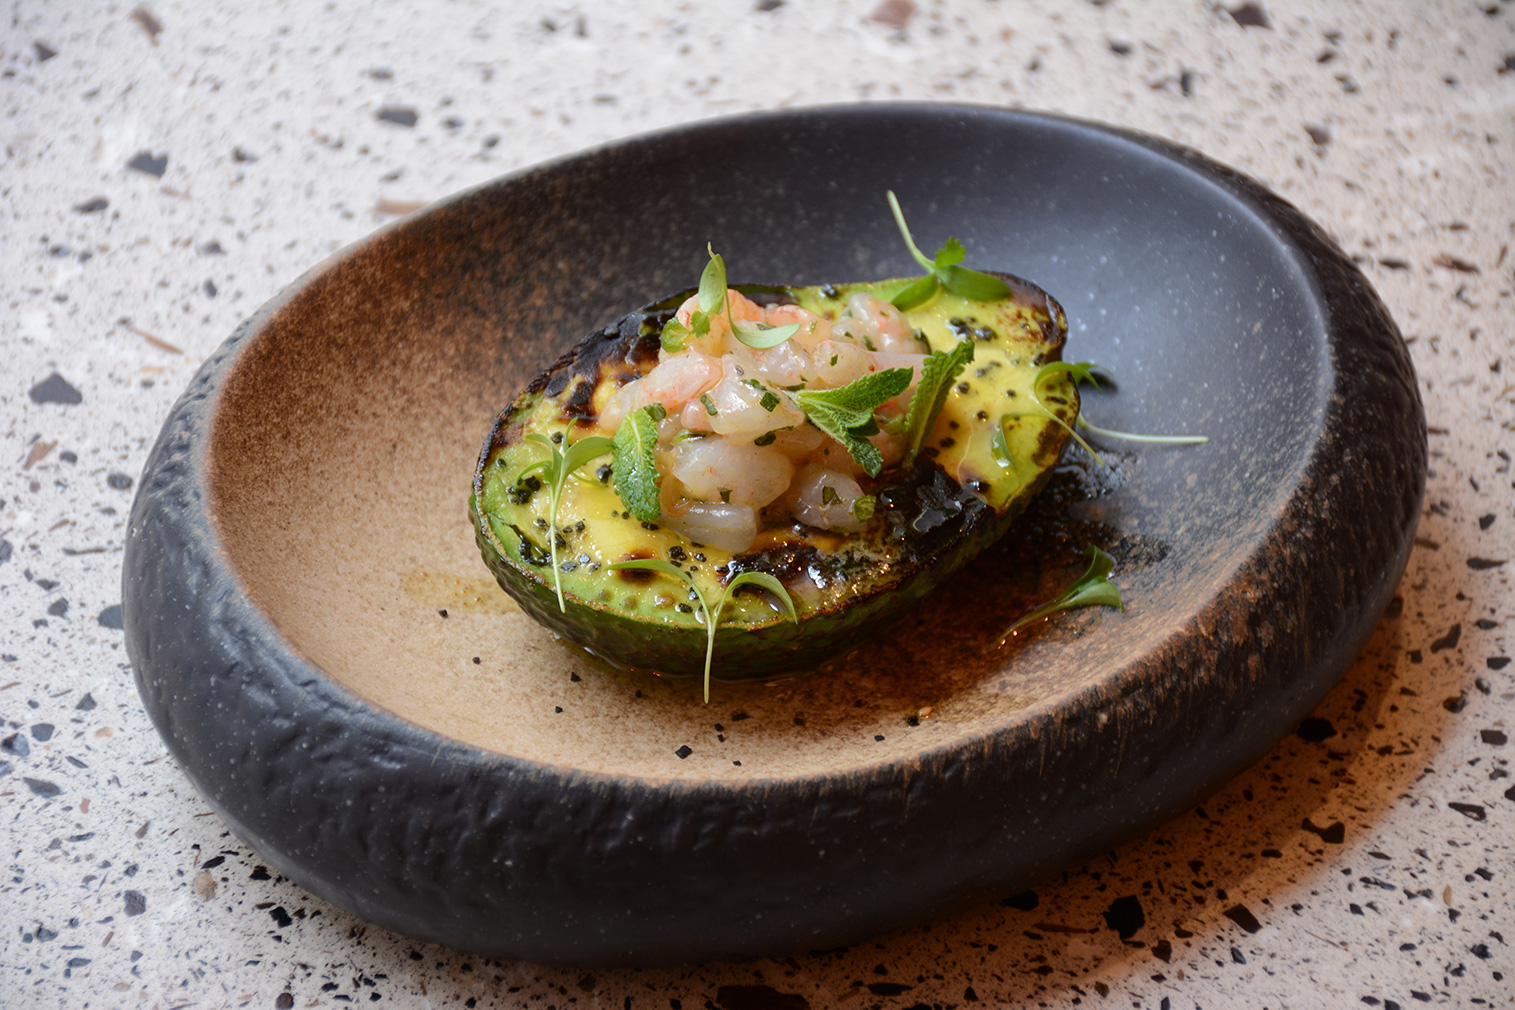 Grilled avocado topped by shrimp